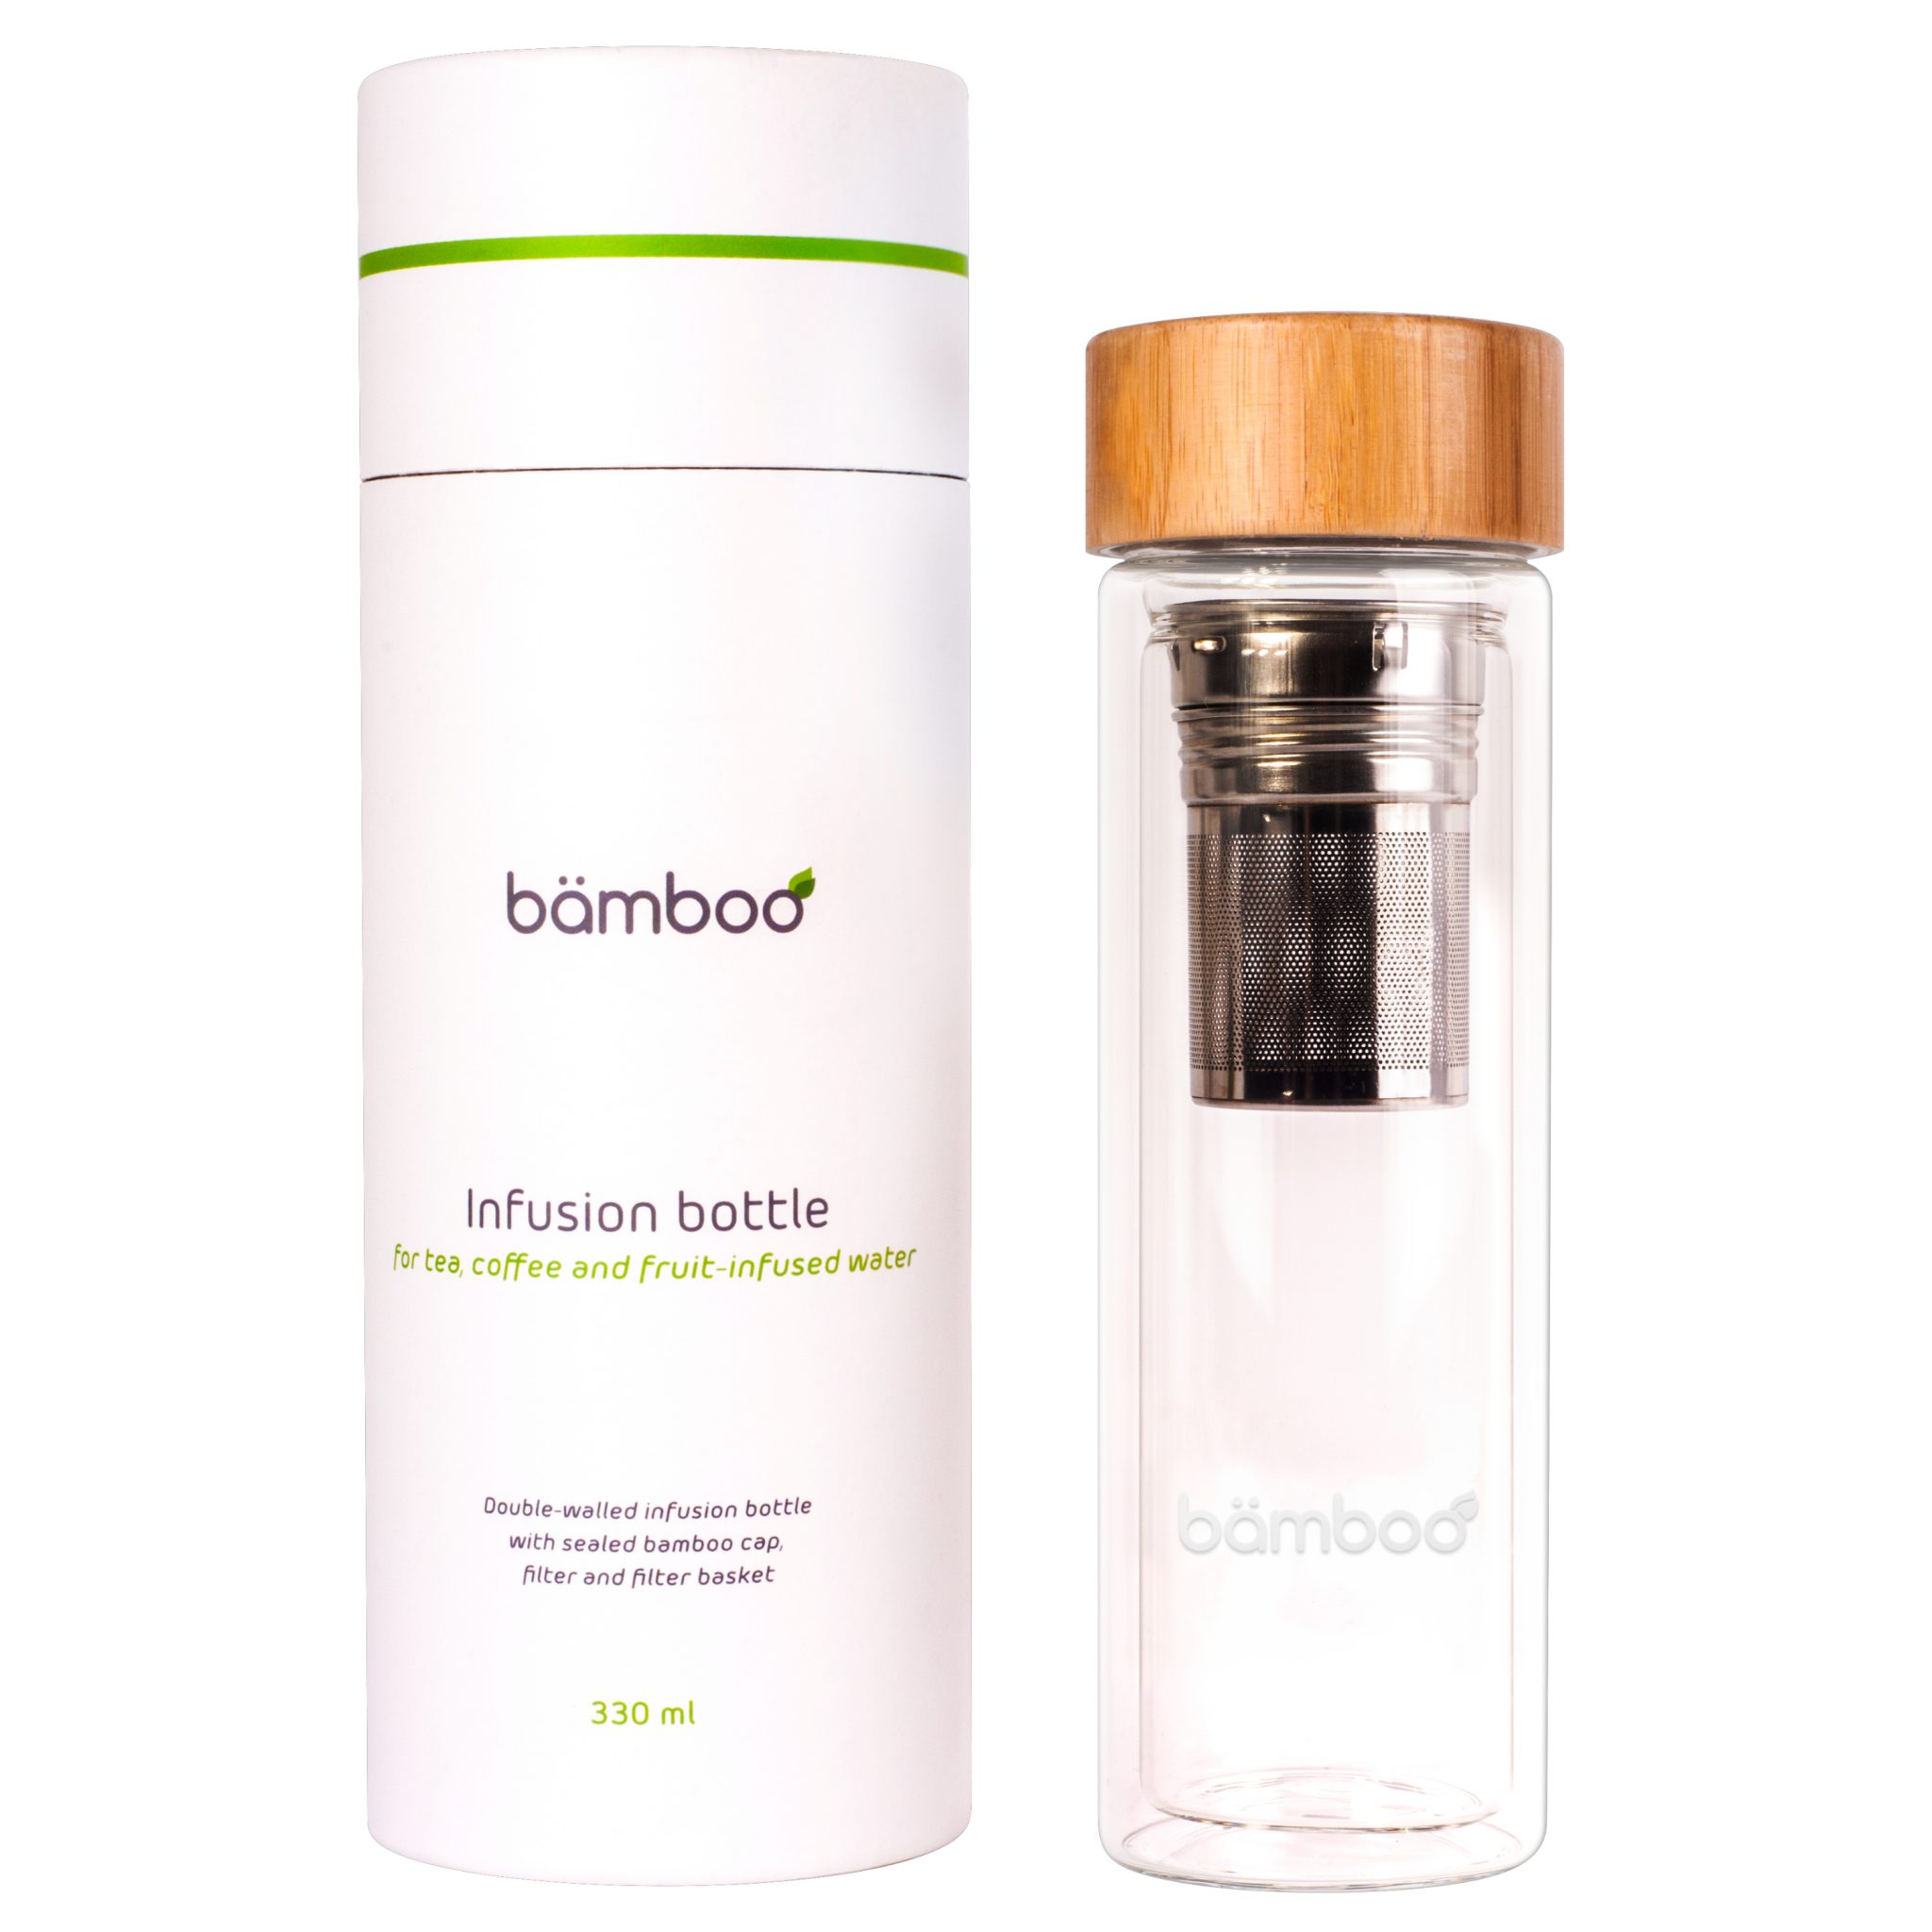 bämboo infusion bottle